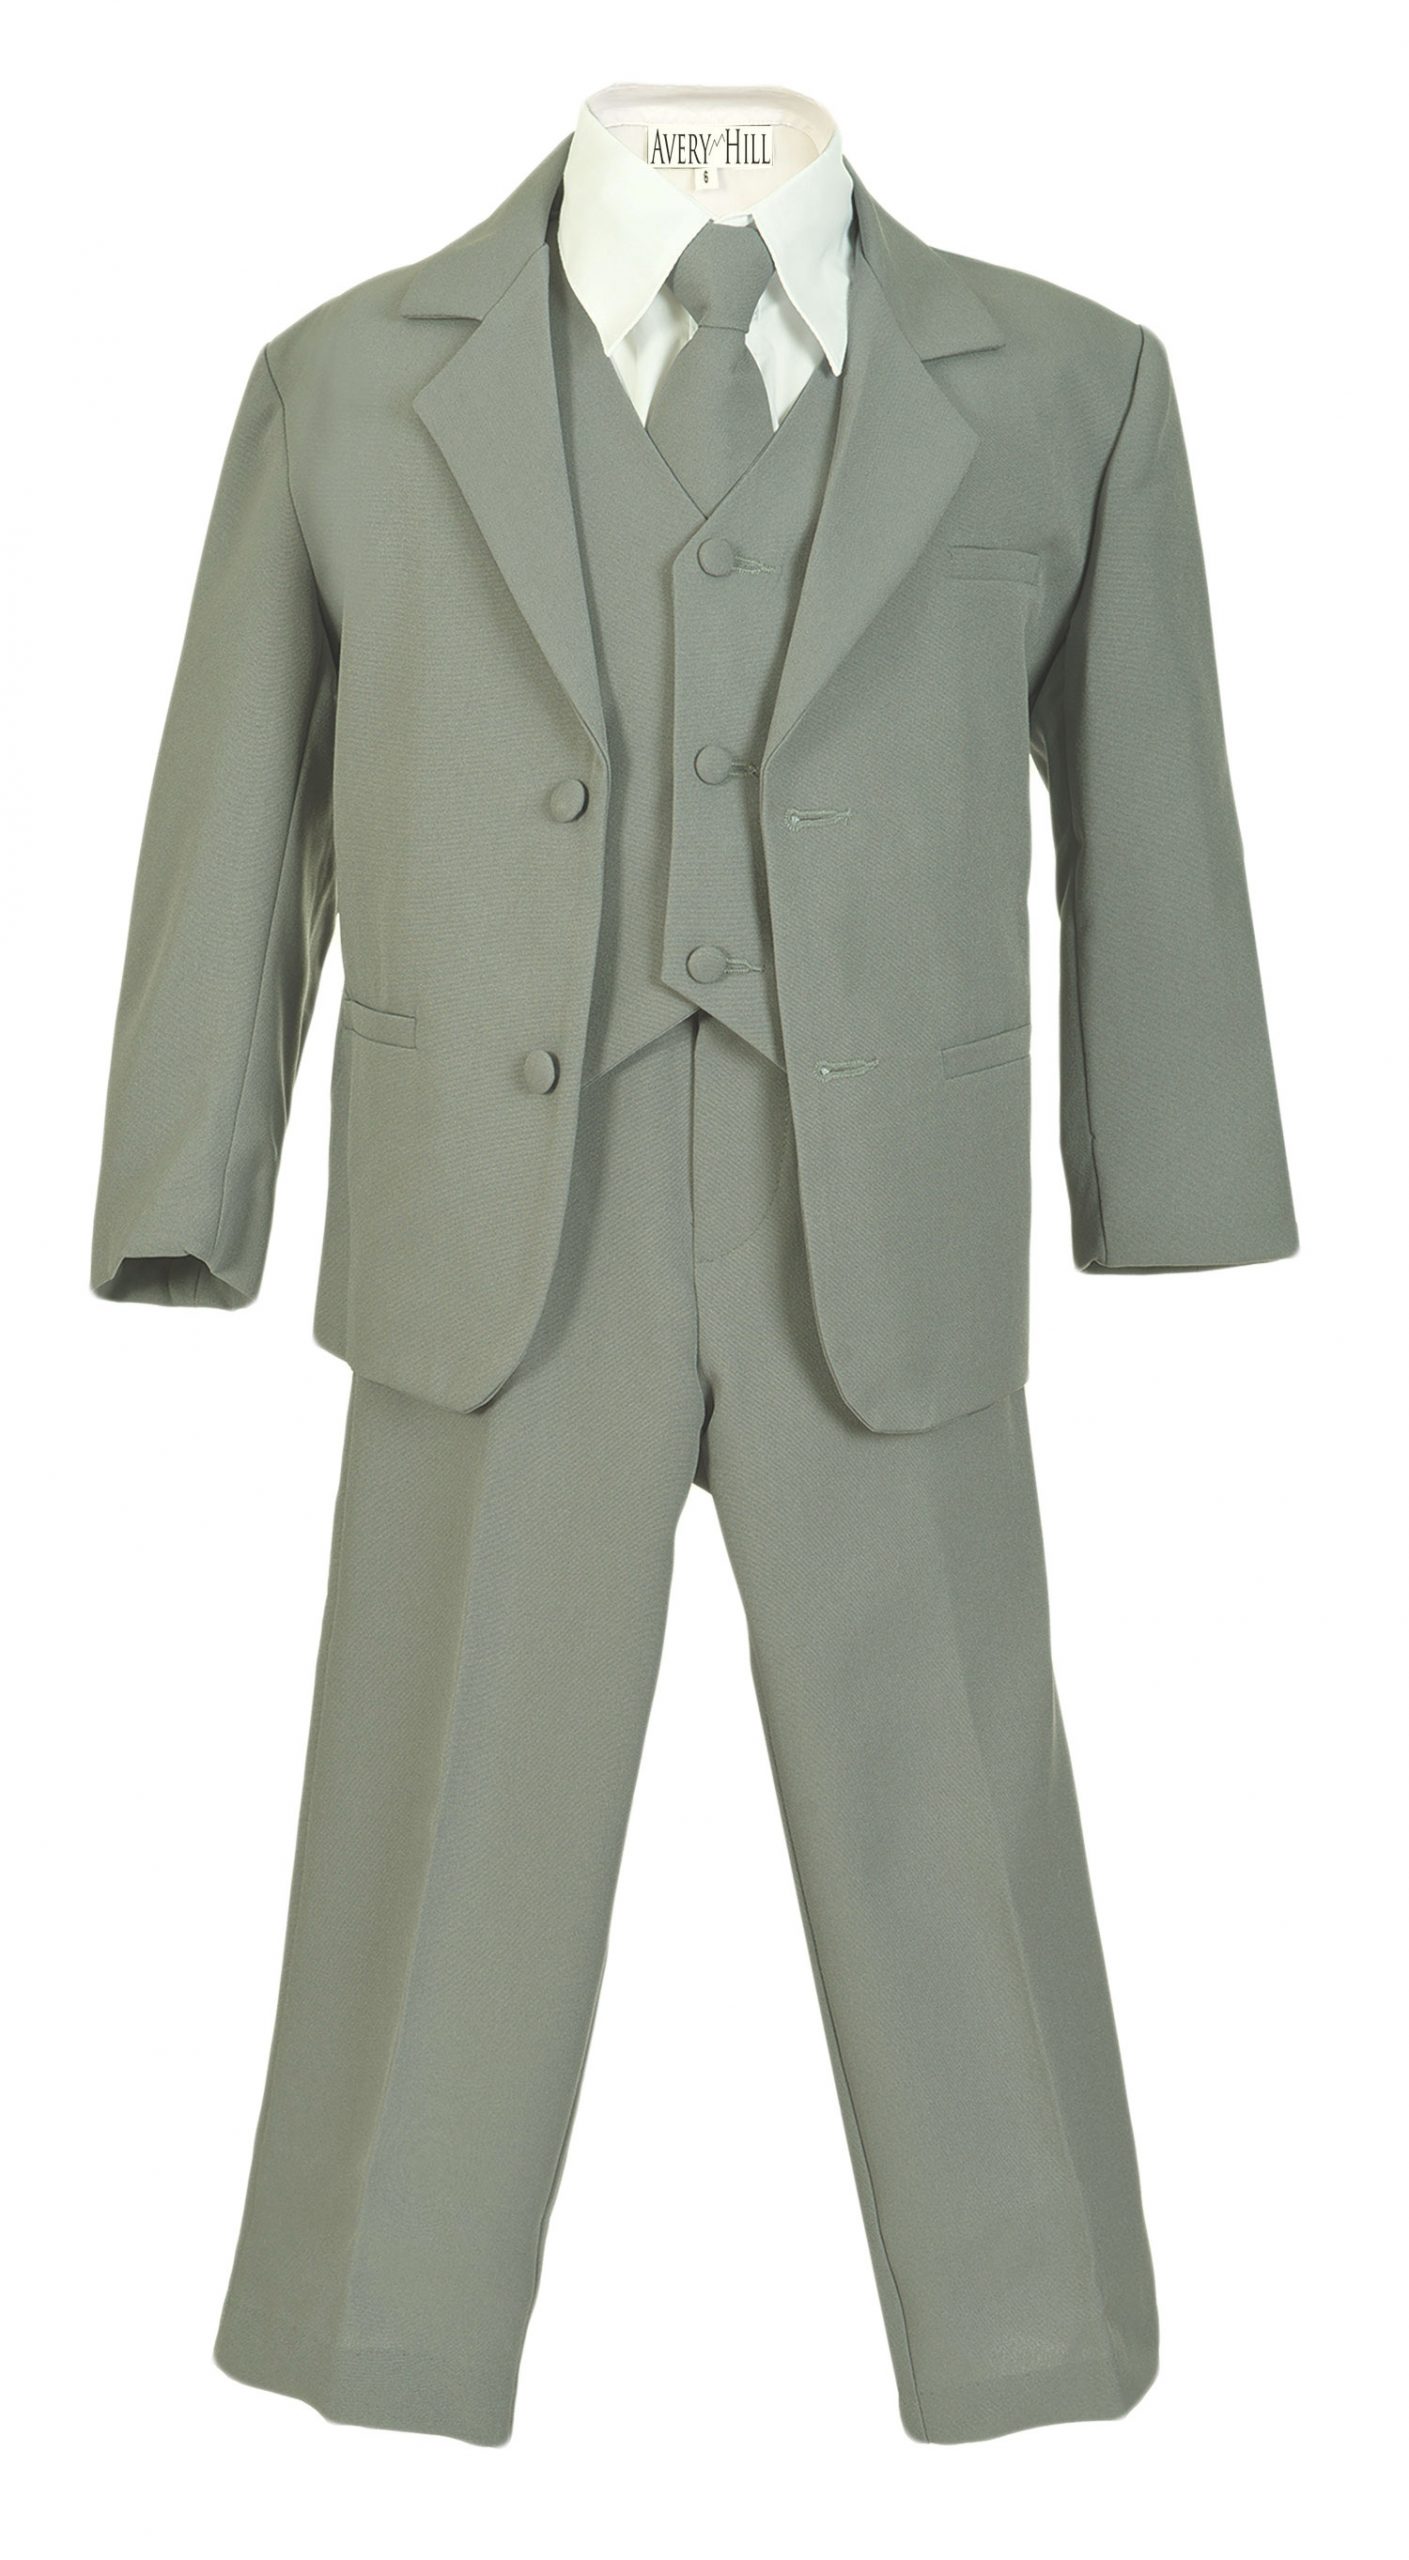 Avery Hill Boys Formal 5 Piece Suit with Shirt and Vest Silver White - S